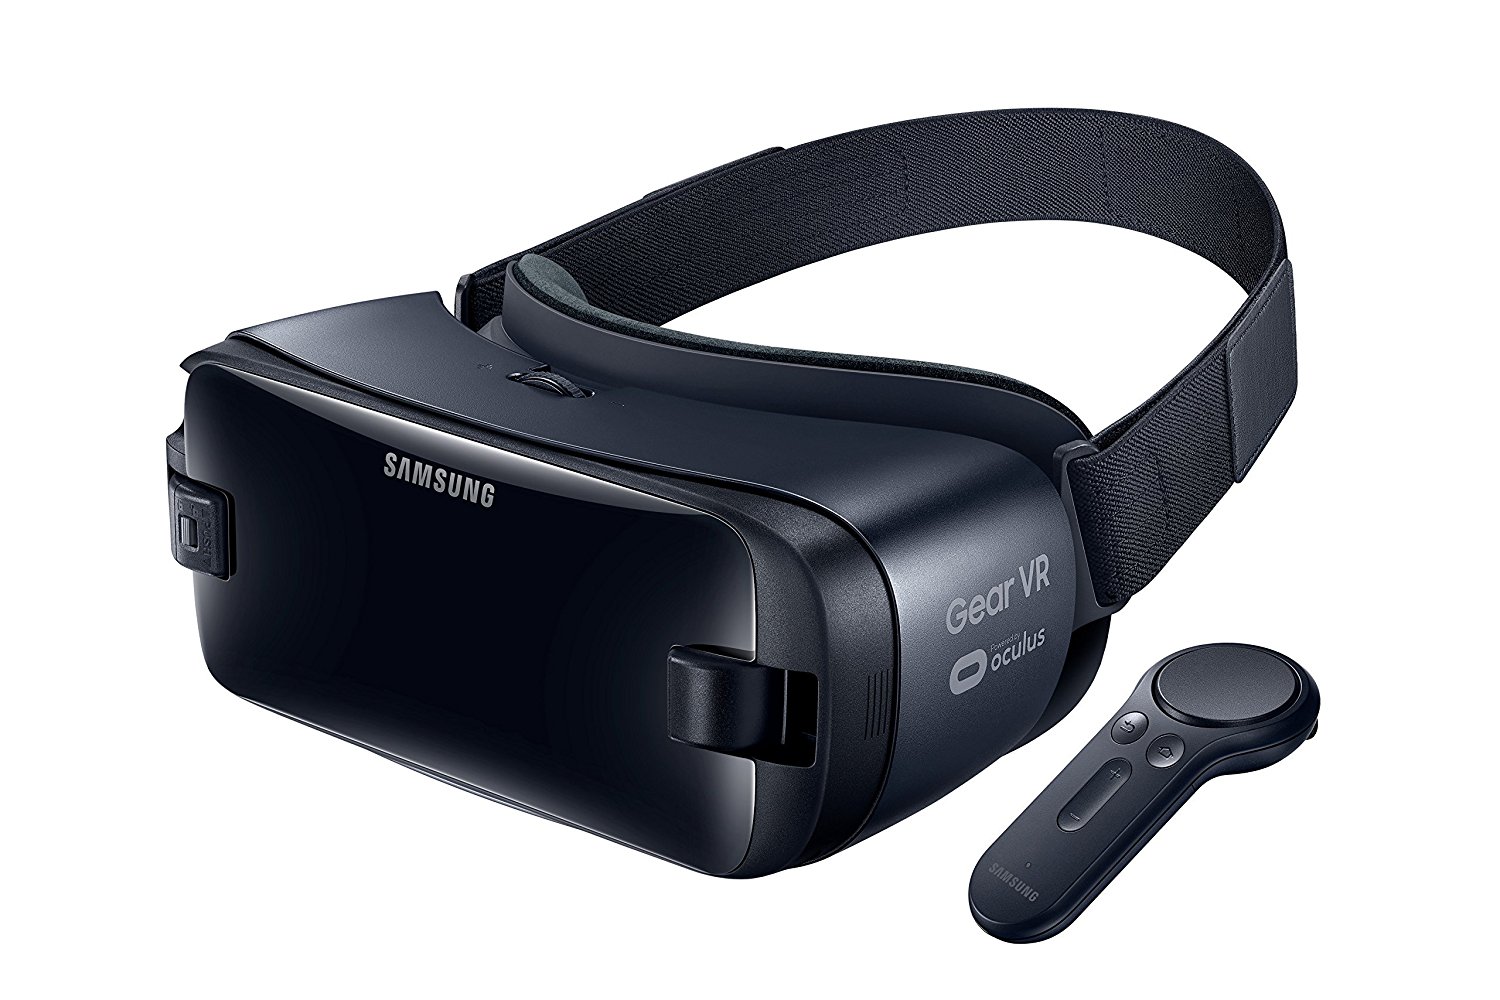 Deals : Samsung Gear VR now available for $99.99 6